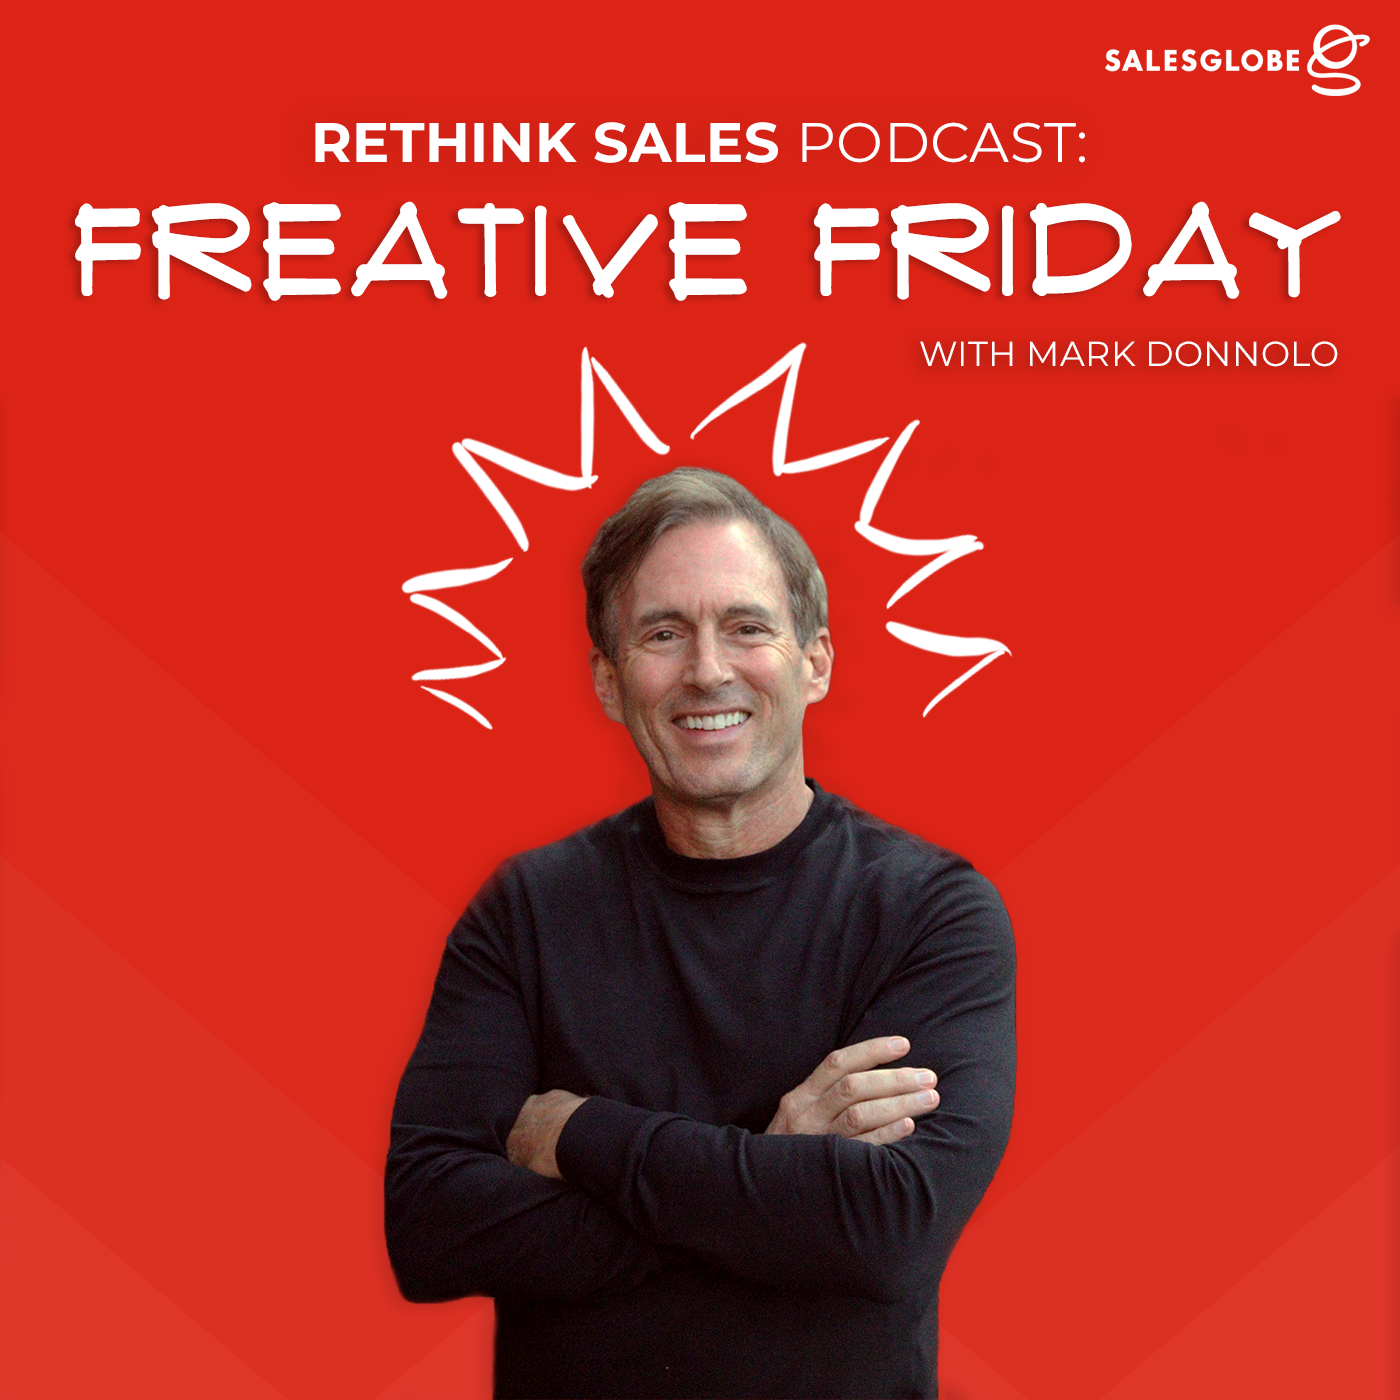 88: Freative Friday - The Art of Listening